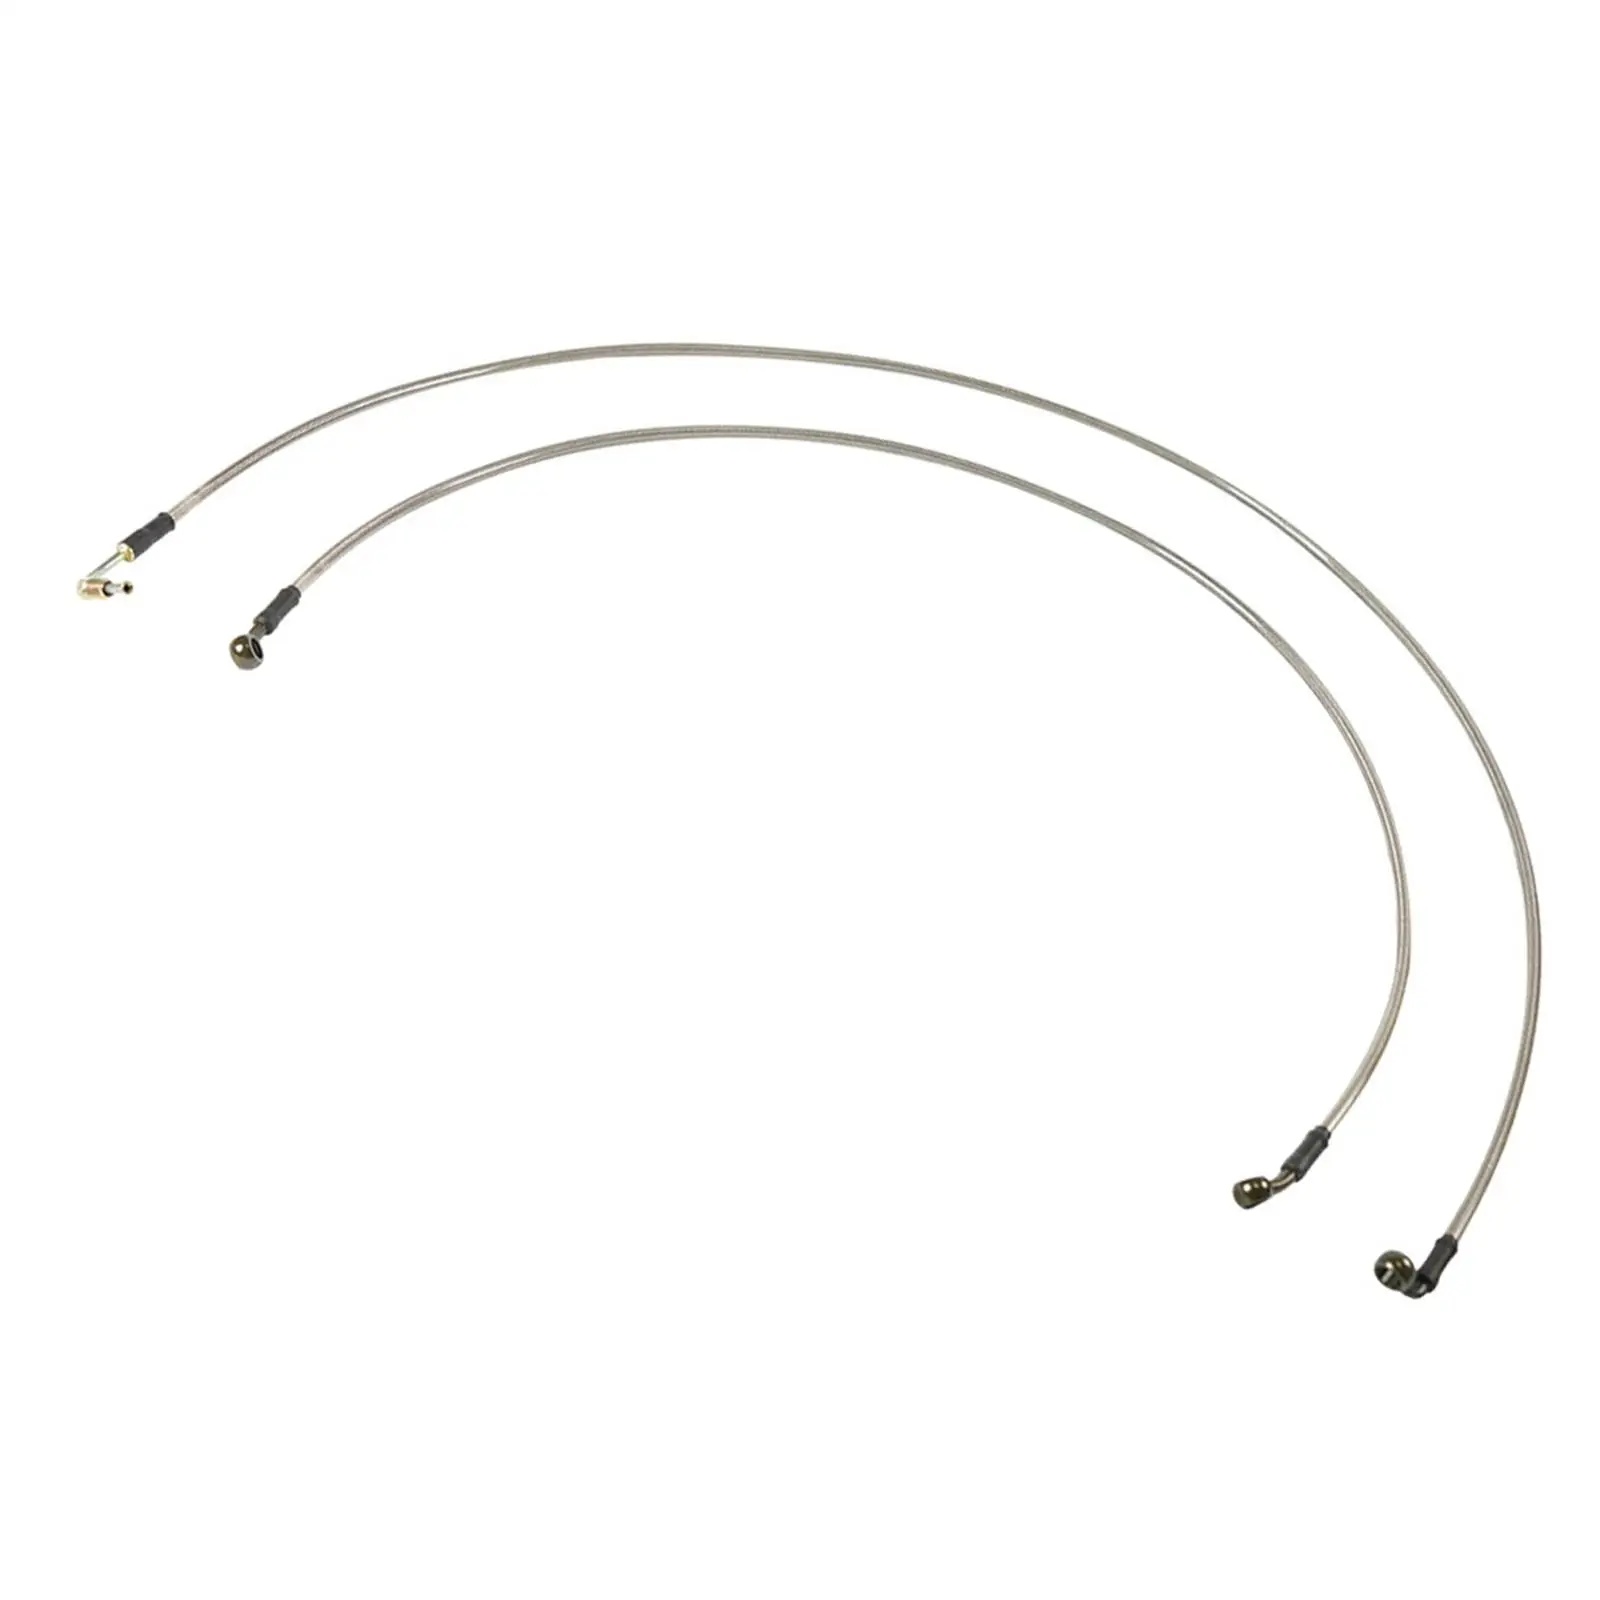 Motorcycle Brake Lines Replace Extended Front & Rear Brake Lines Fits for Polaris RZR 800 S 800